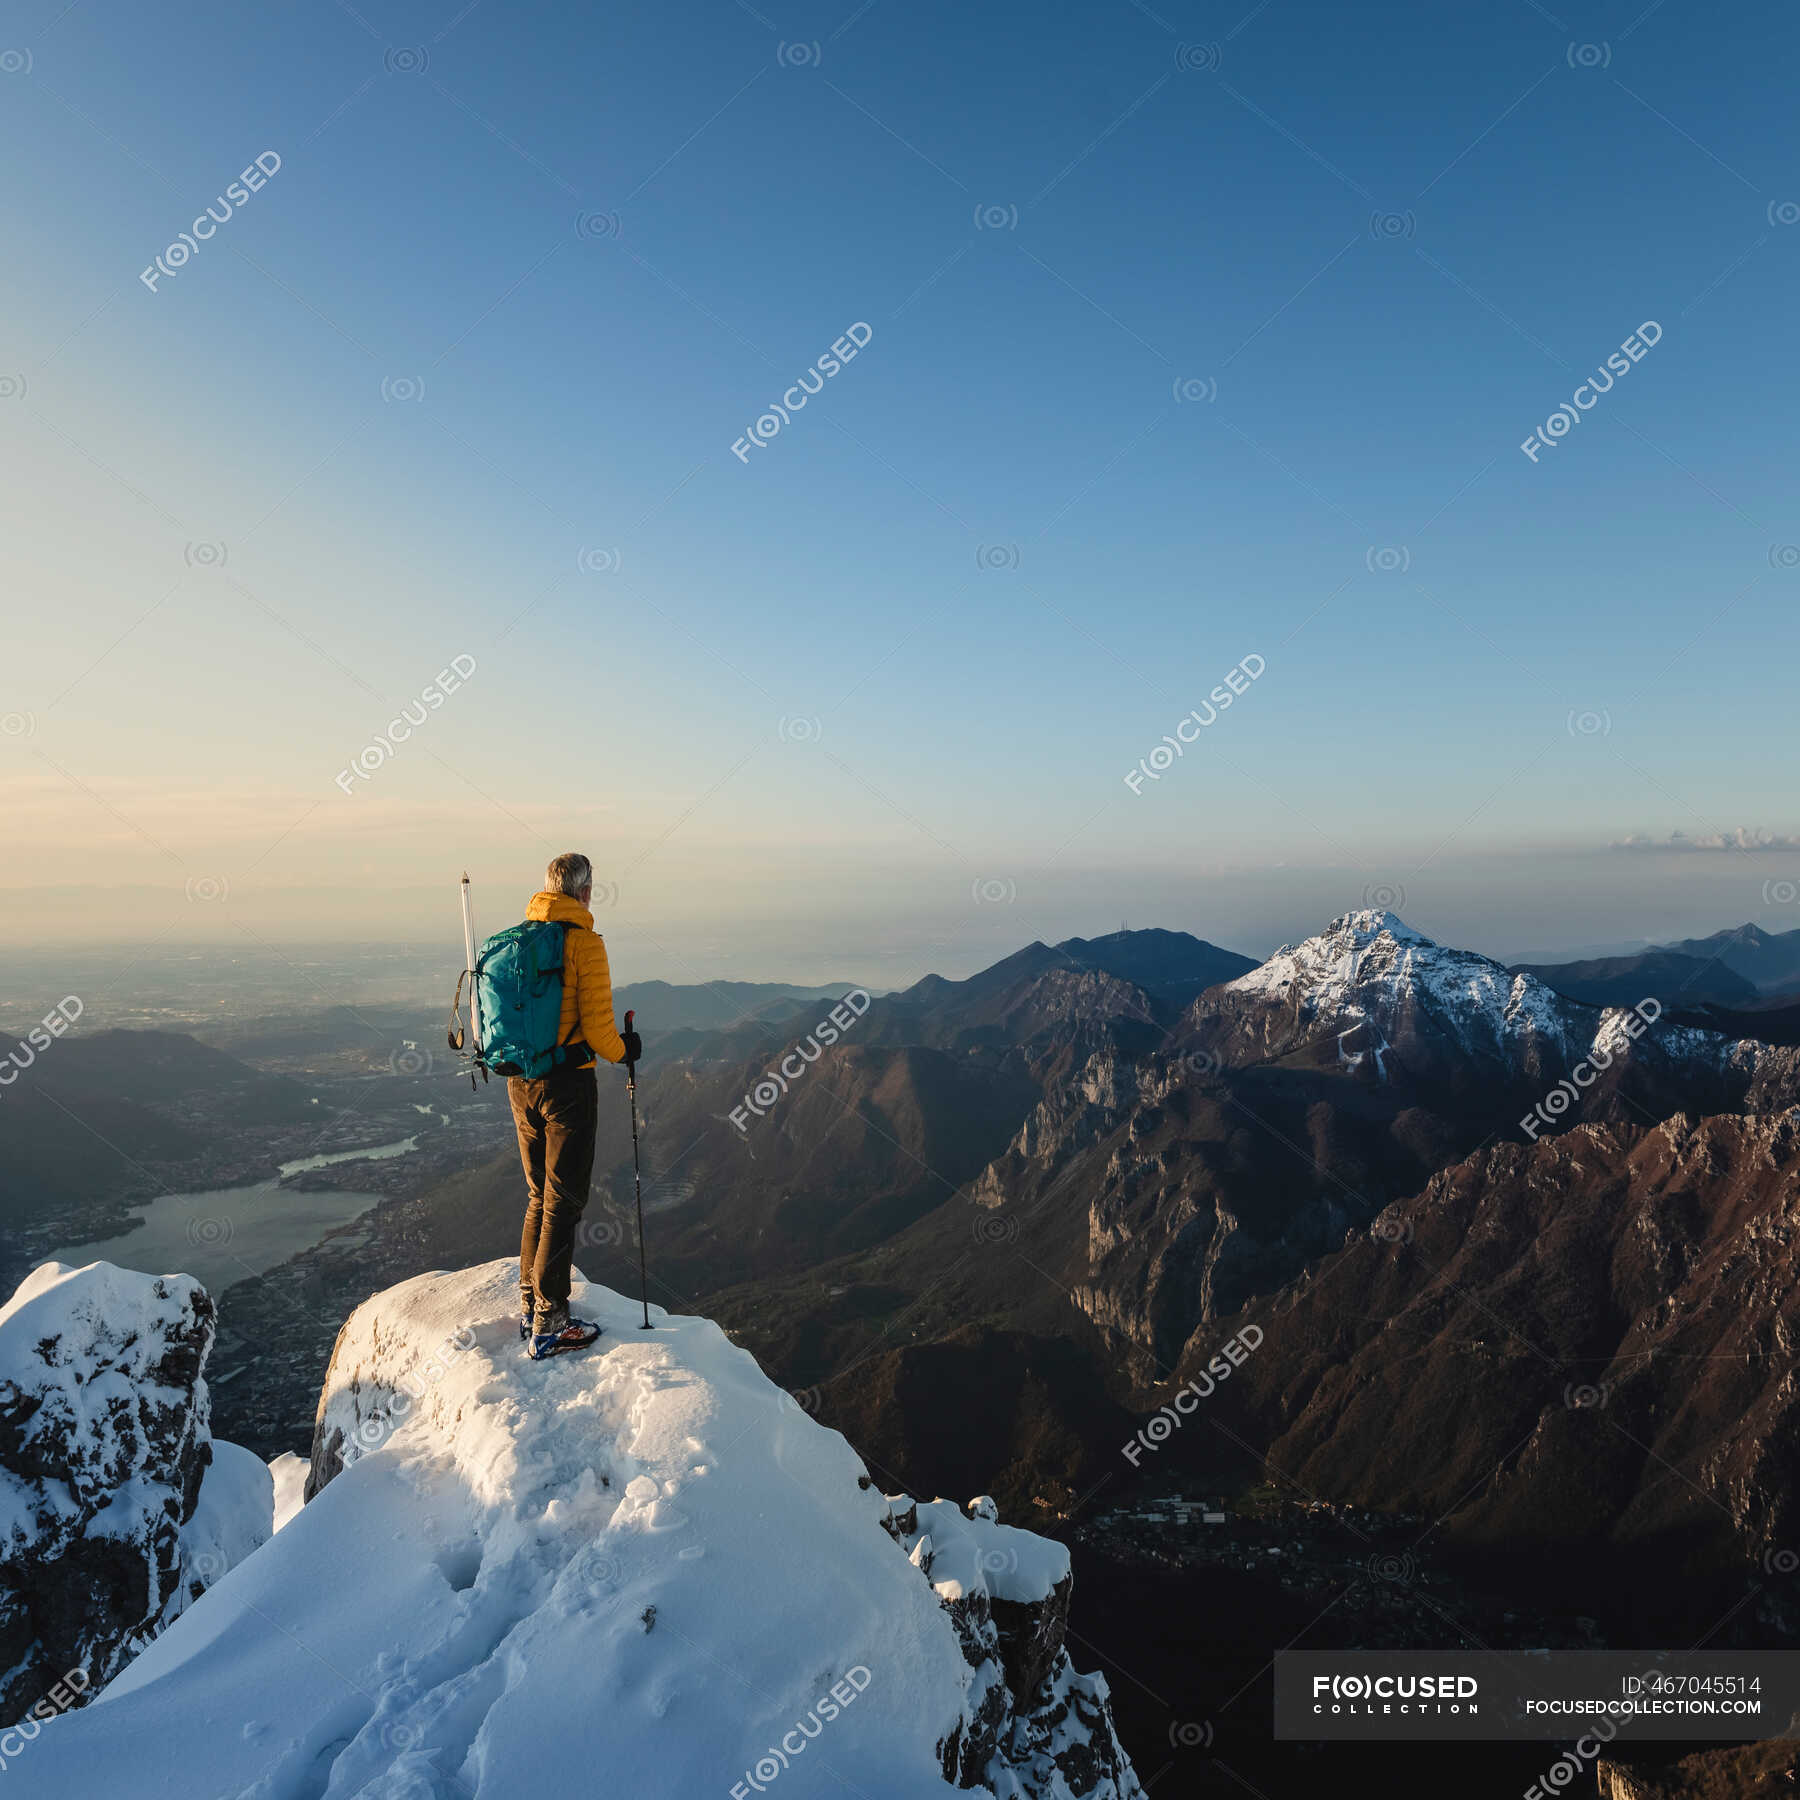 Citron fyrværkeri Ekspert Mountaineer standing on top of a snowy mountain enjoying the view, Lecco,  Italy — winter, nature - Stock Photo | #467045514